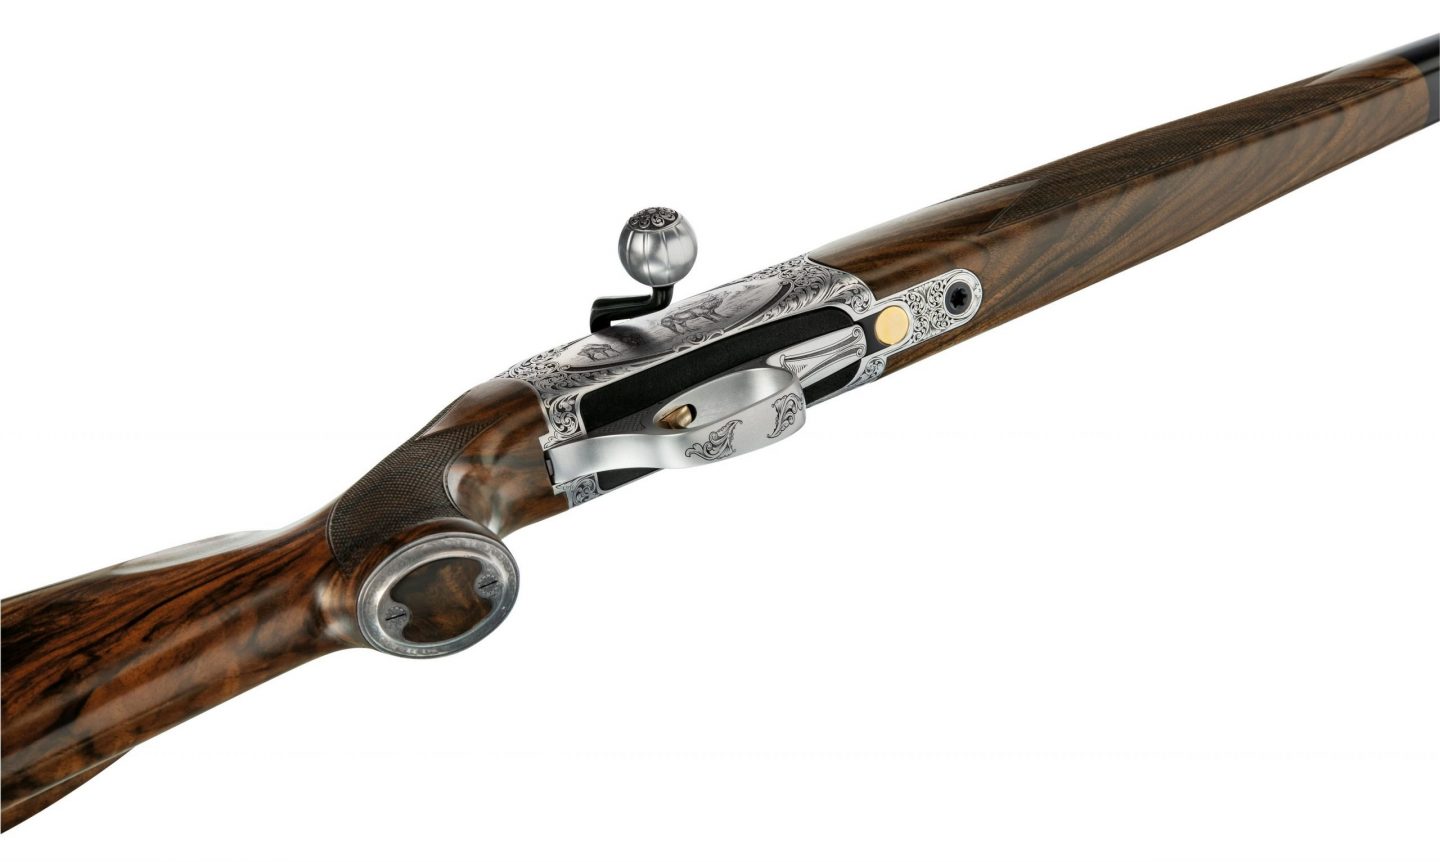 Rifle review: The straight-pull Chapuis Armes ROLS impresses on